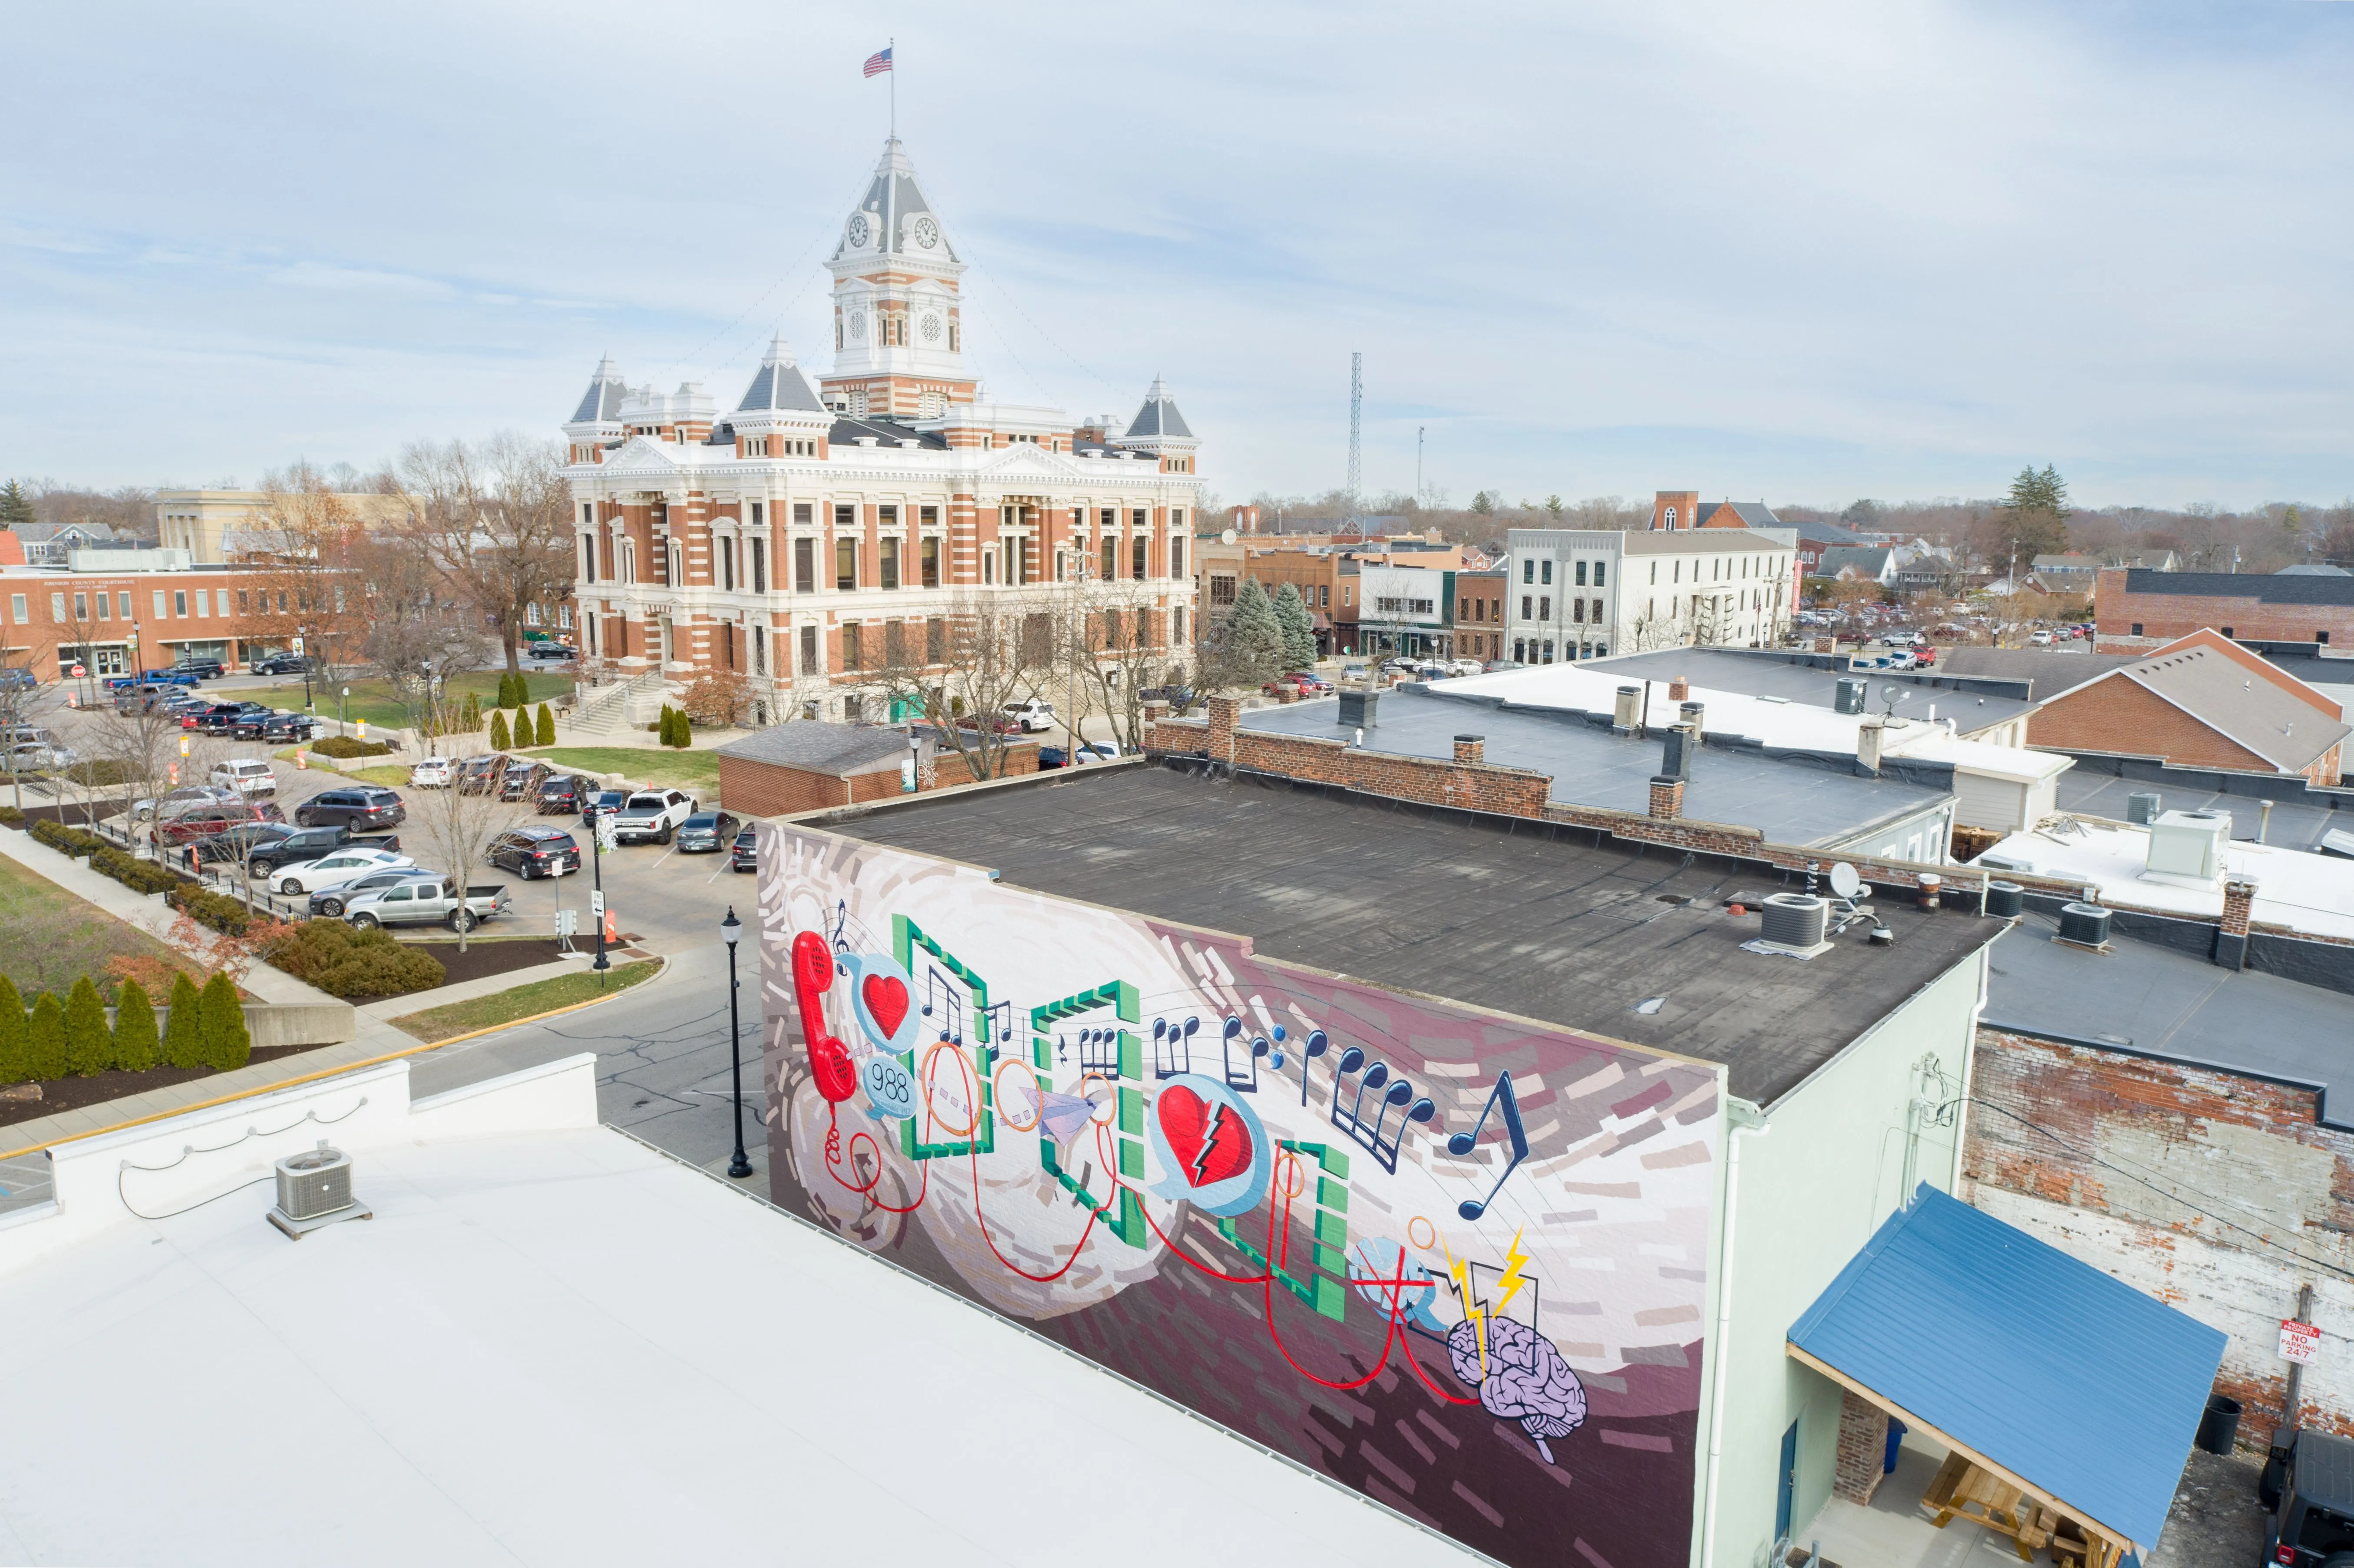 Aerial view of a cityscape with graffiti art on a building foreground and a historic domed building in the background.